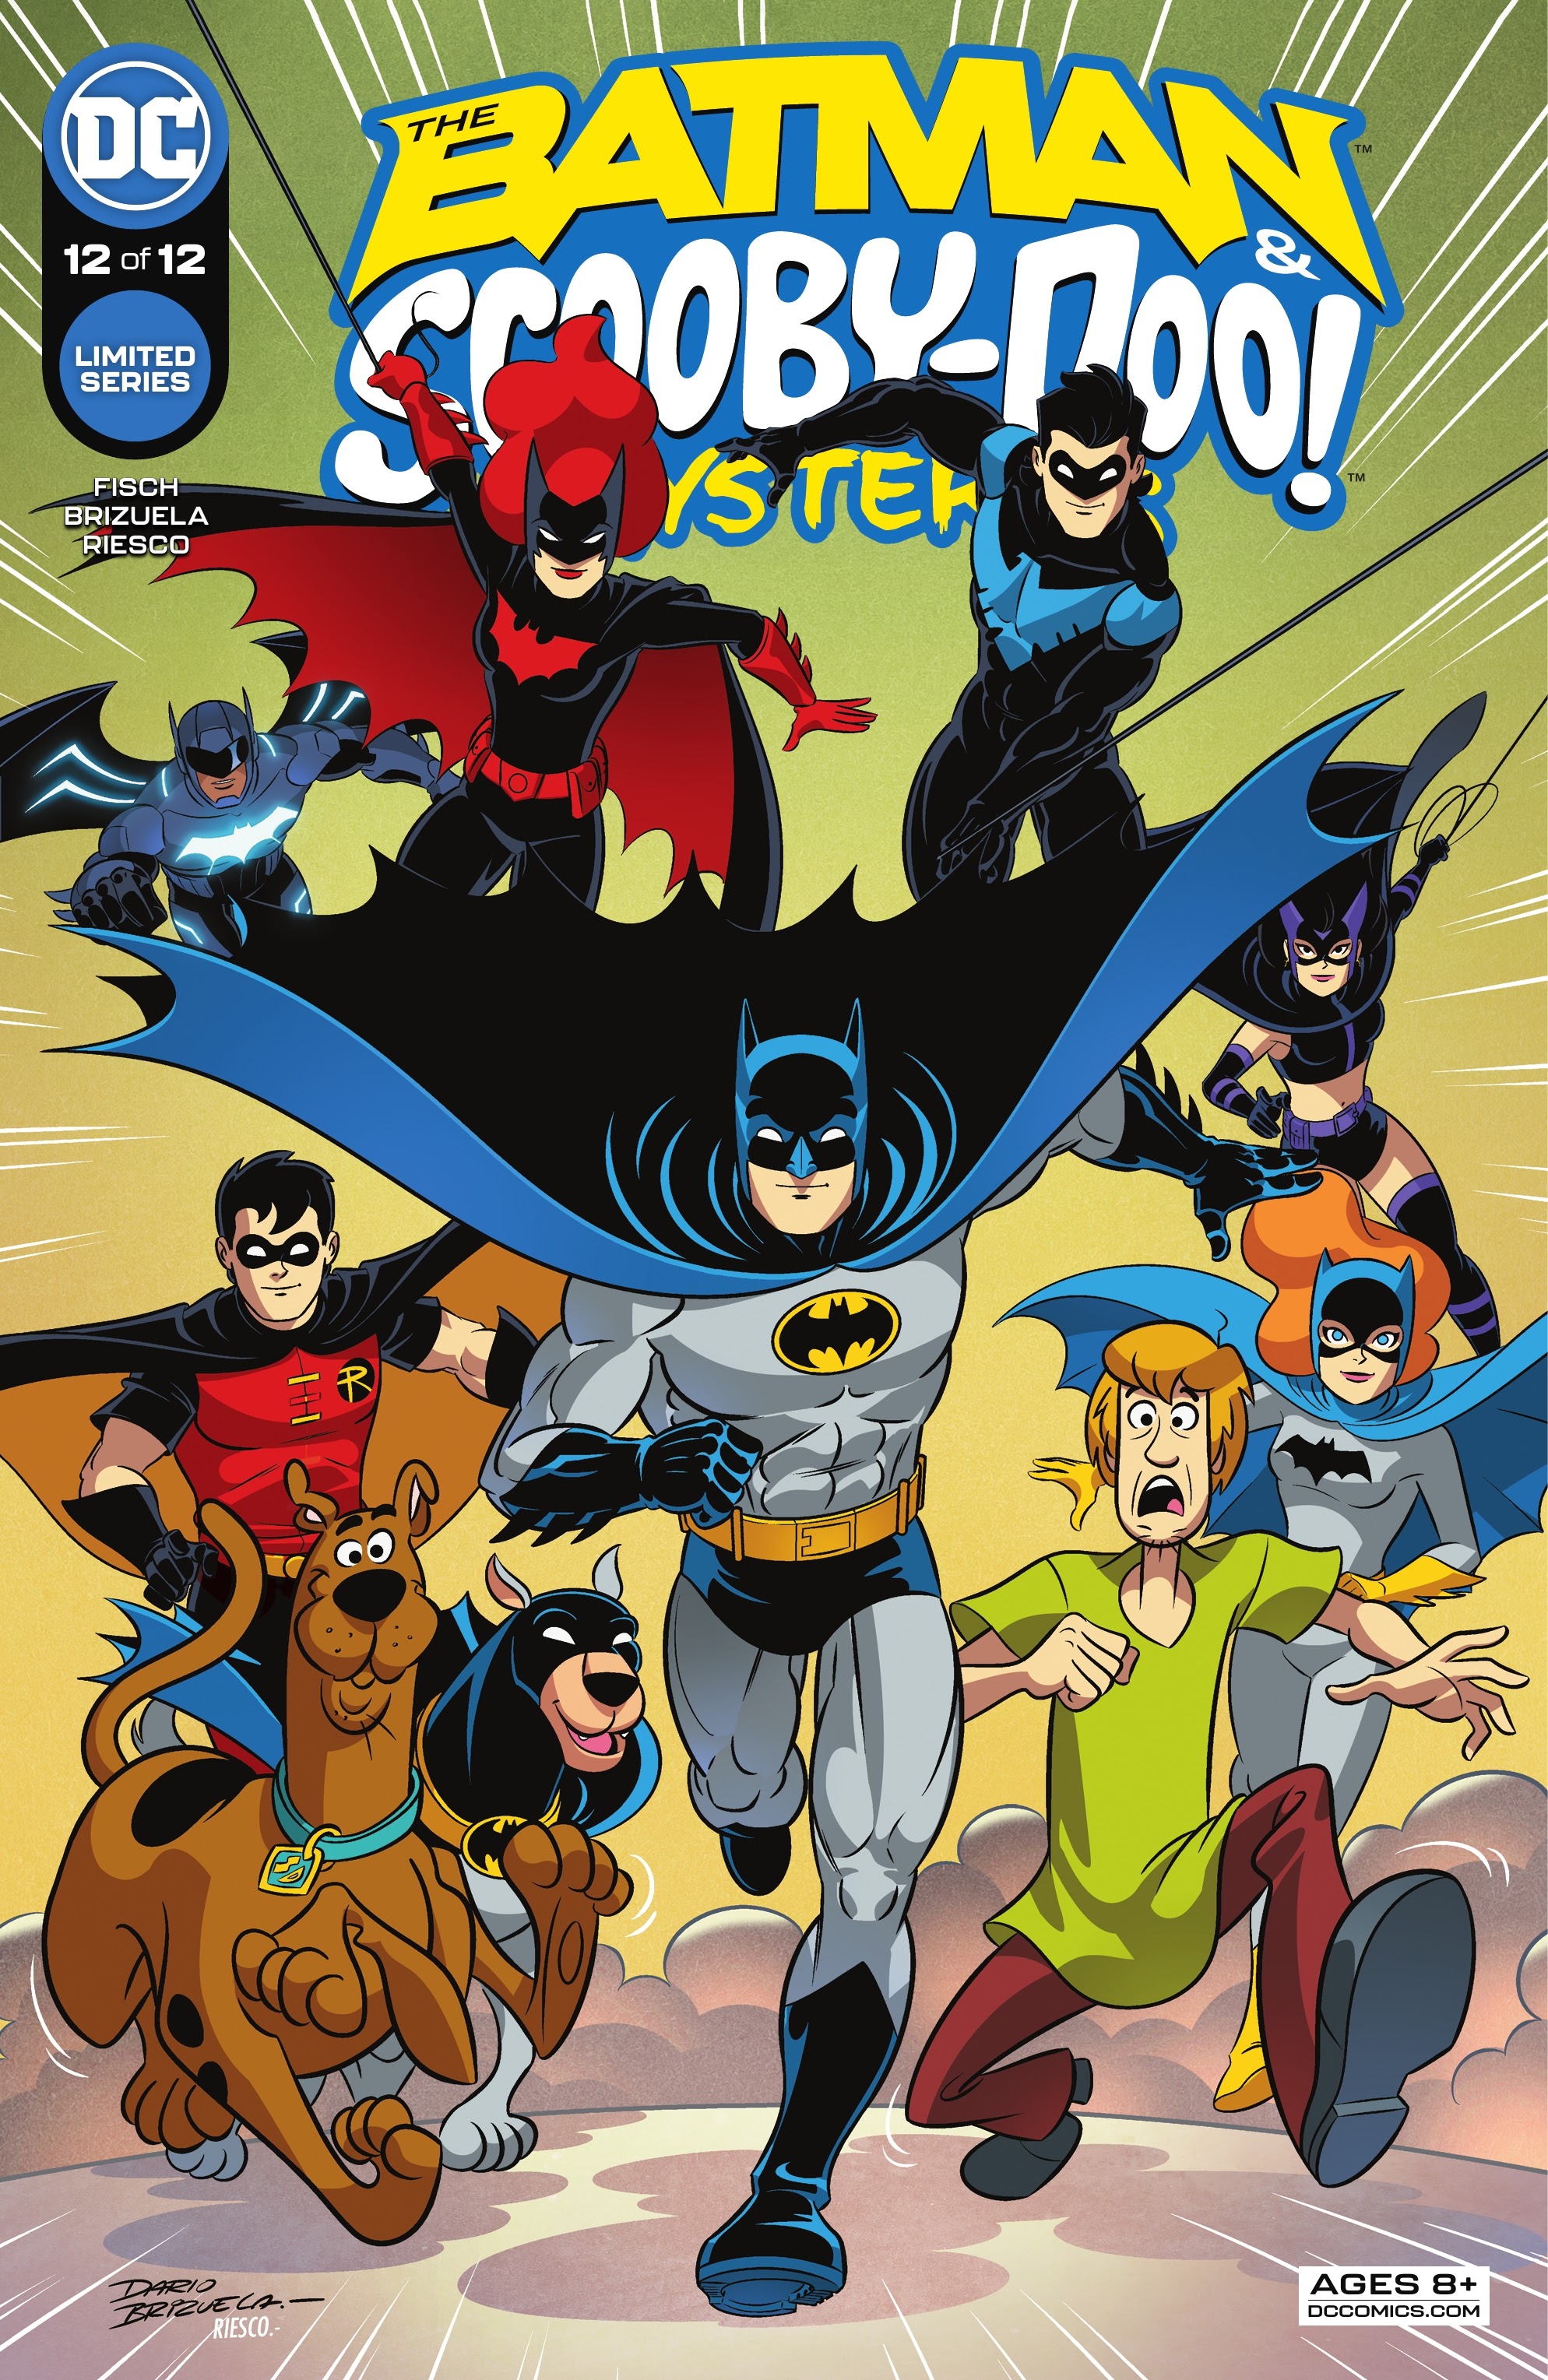 The Batman Scooby Doo Mysteries Issue 12 | Read The Batman Scooby Doo  Mysteries Issue 12 comic online in high quality. Read Full Comic online for  free - Read comics online in